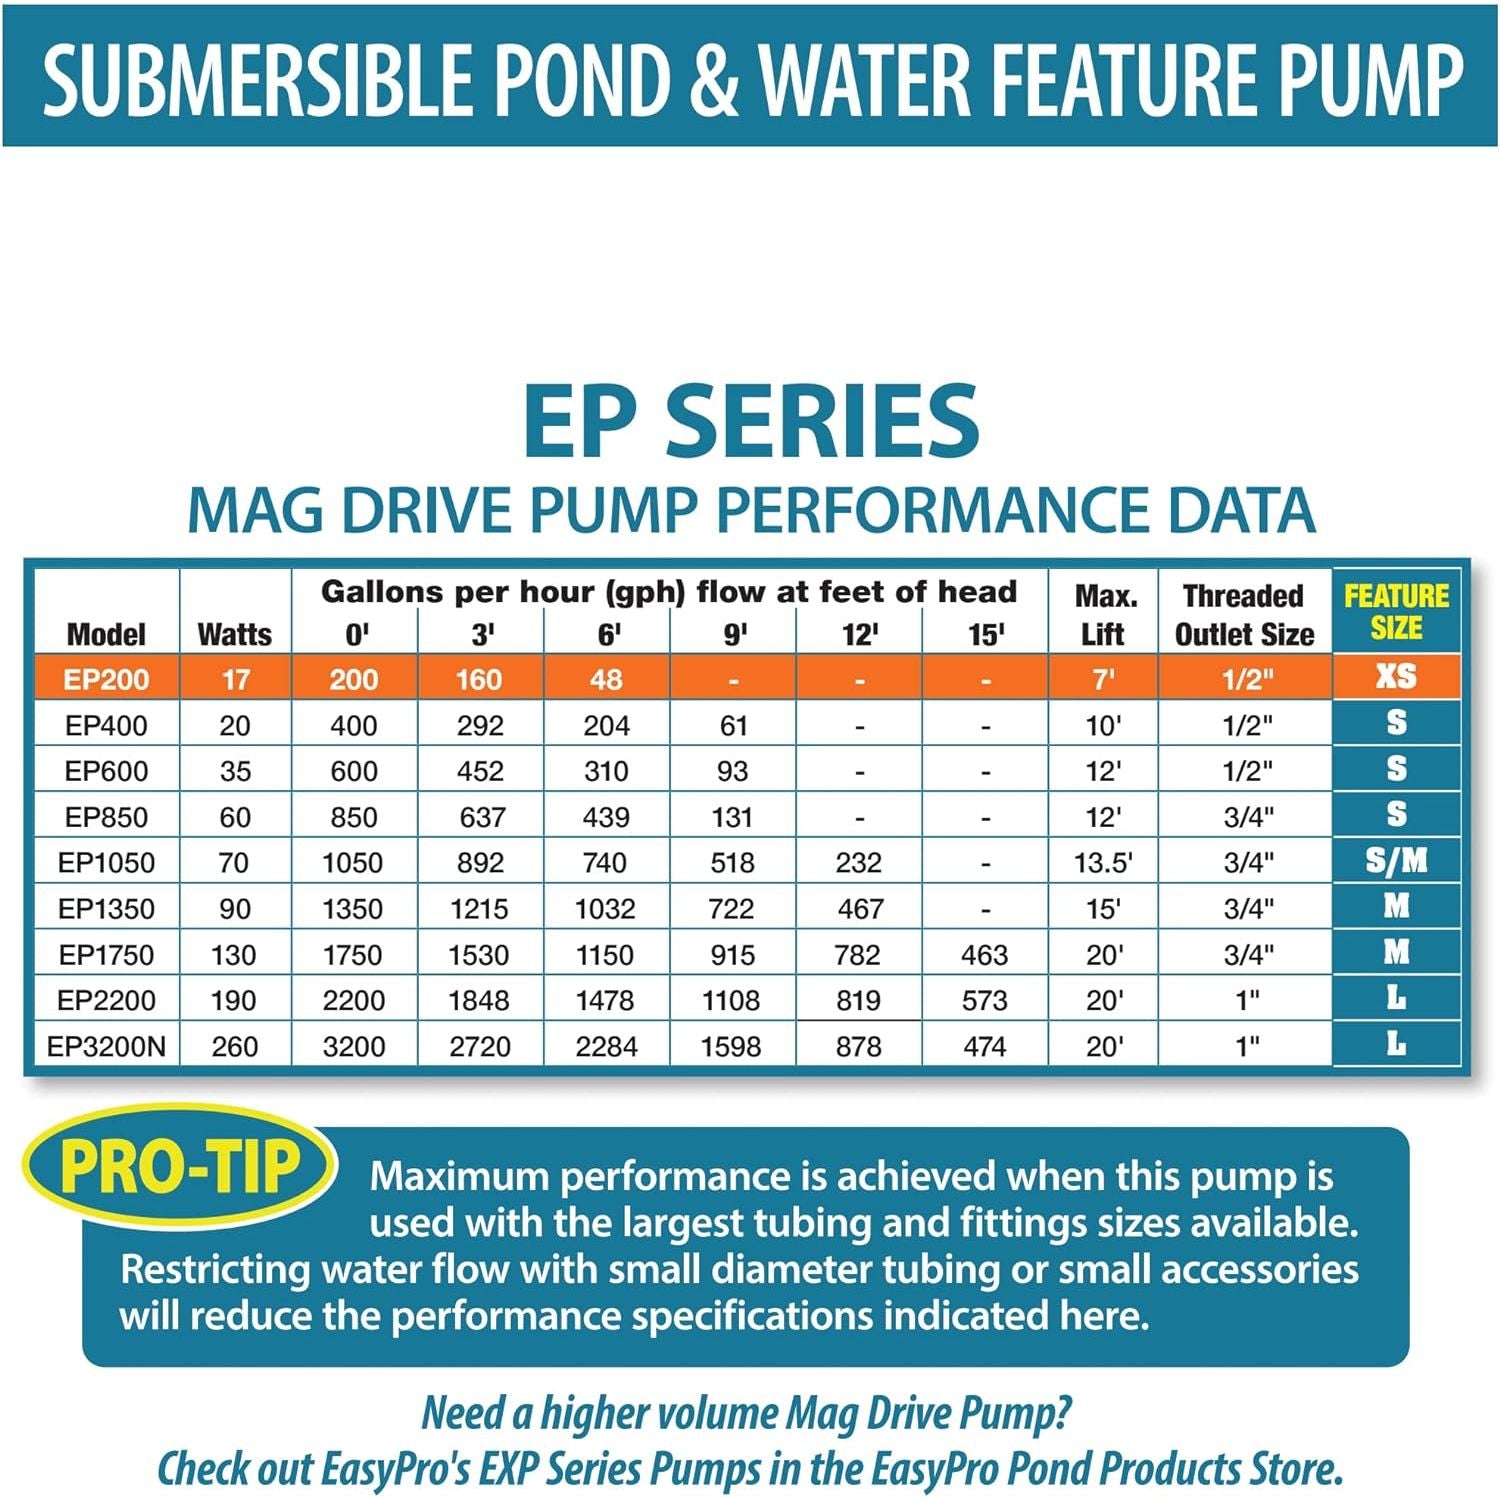 EP200 Submersible Mag Drive Pump 200 GPH Reliable | Quiet & Energy Efficient - American Pond Supplies Easy Pro Mag Drive Pumps Mag Drive Pumps